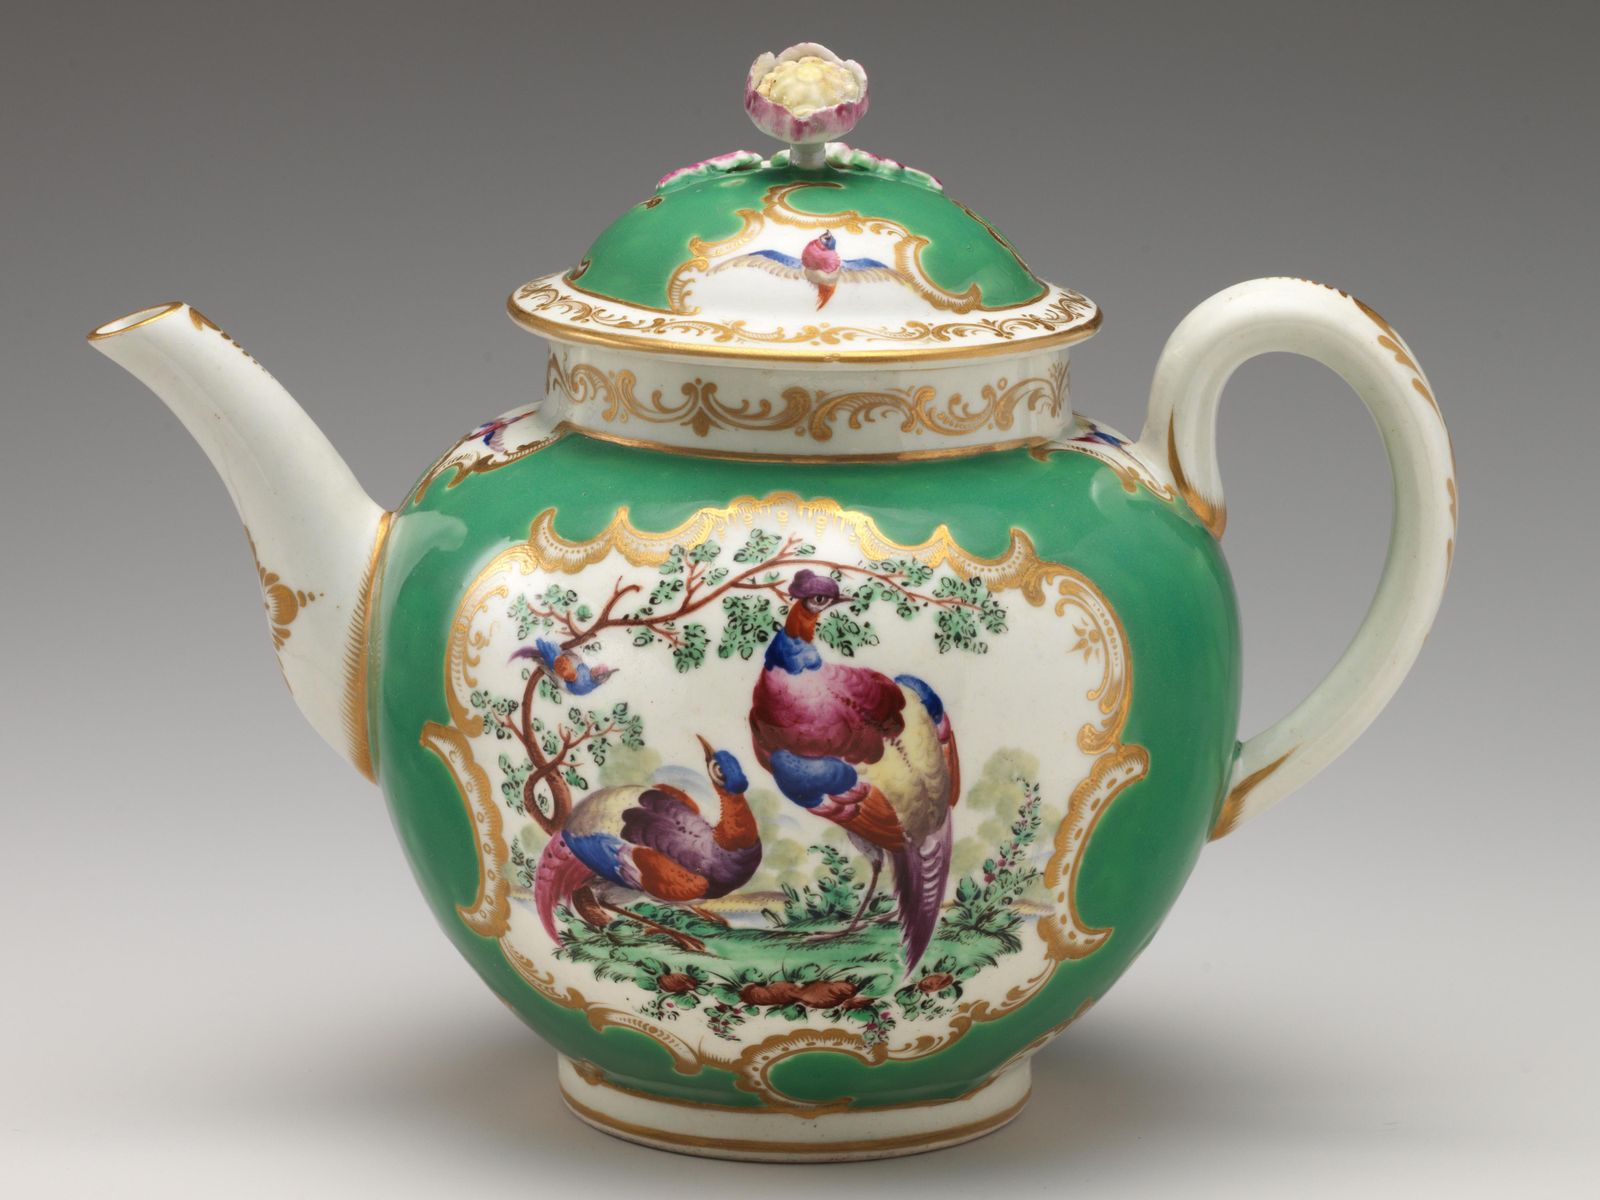 Shopping for Teapots - The New York Times